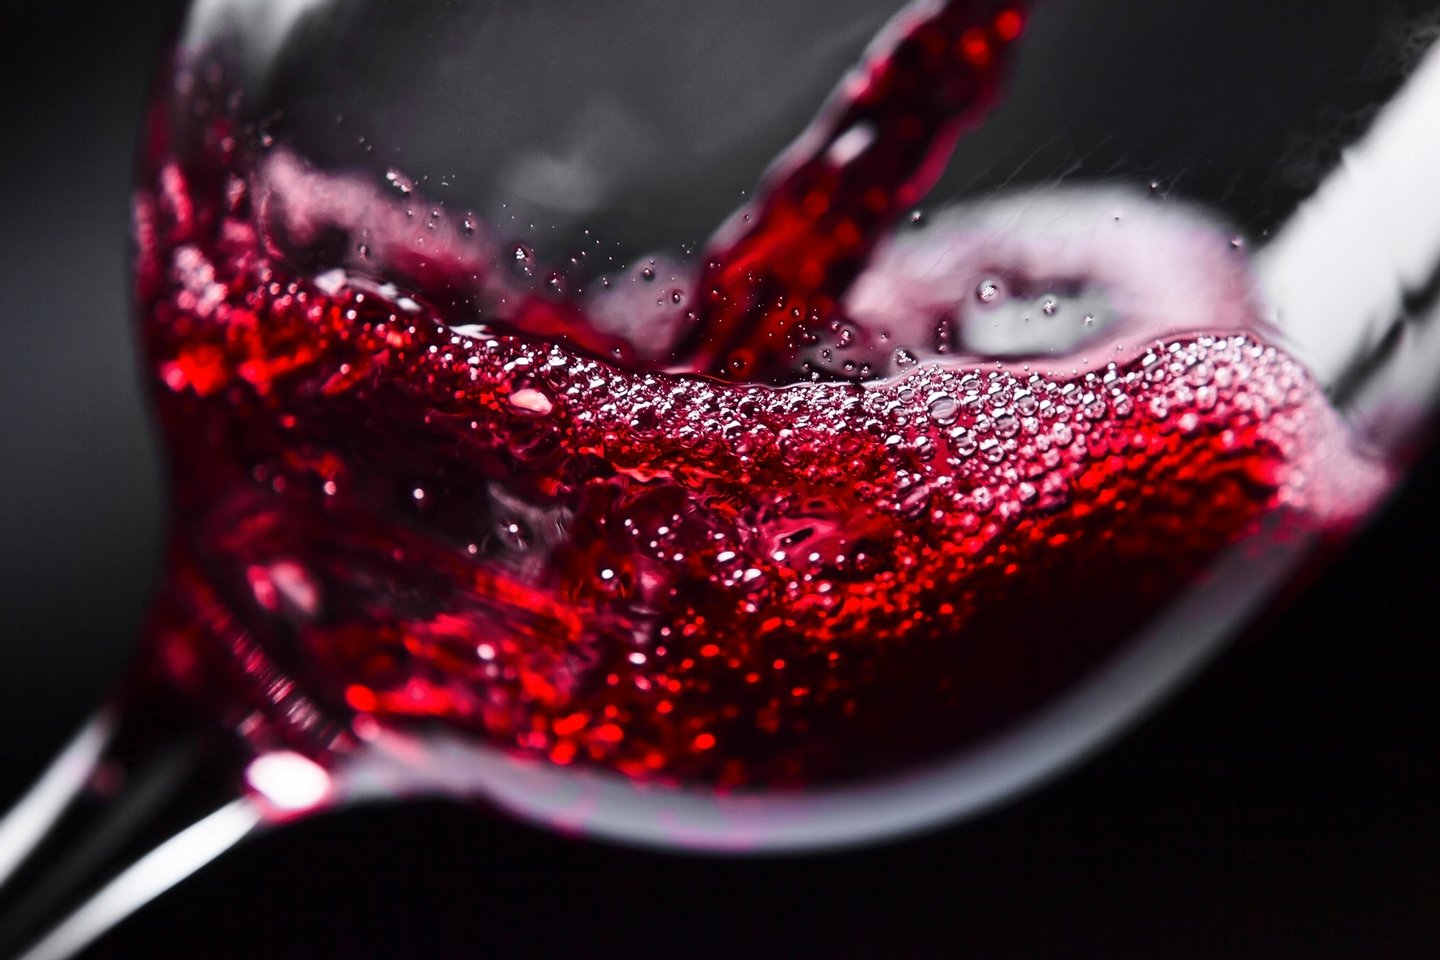 Alcohol, Black, Blurred Motion, Bubble, Close-up, Drink, Filling, Froth, Glass, Gourmet, Horizontal, Liquid, Macro, Motion, Pouring, Red, Red Wine, Reflection, Shot Glass, Studio Shot, Translucent, Transparent, Wet, Wine, Wineglass, 